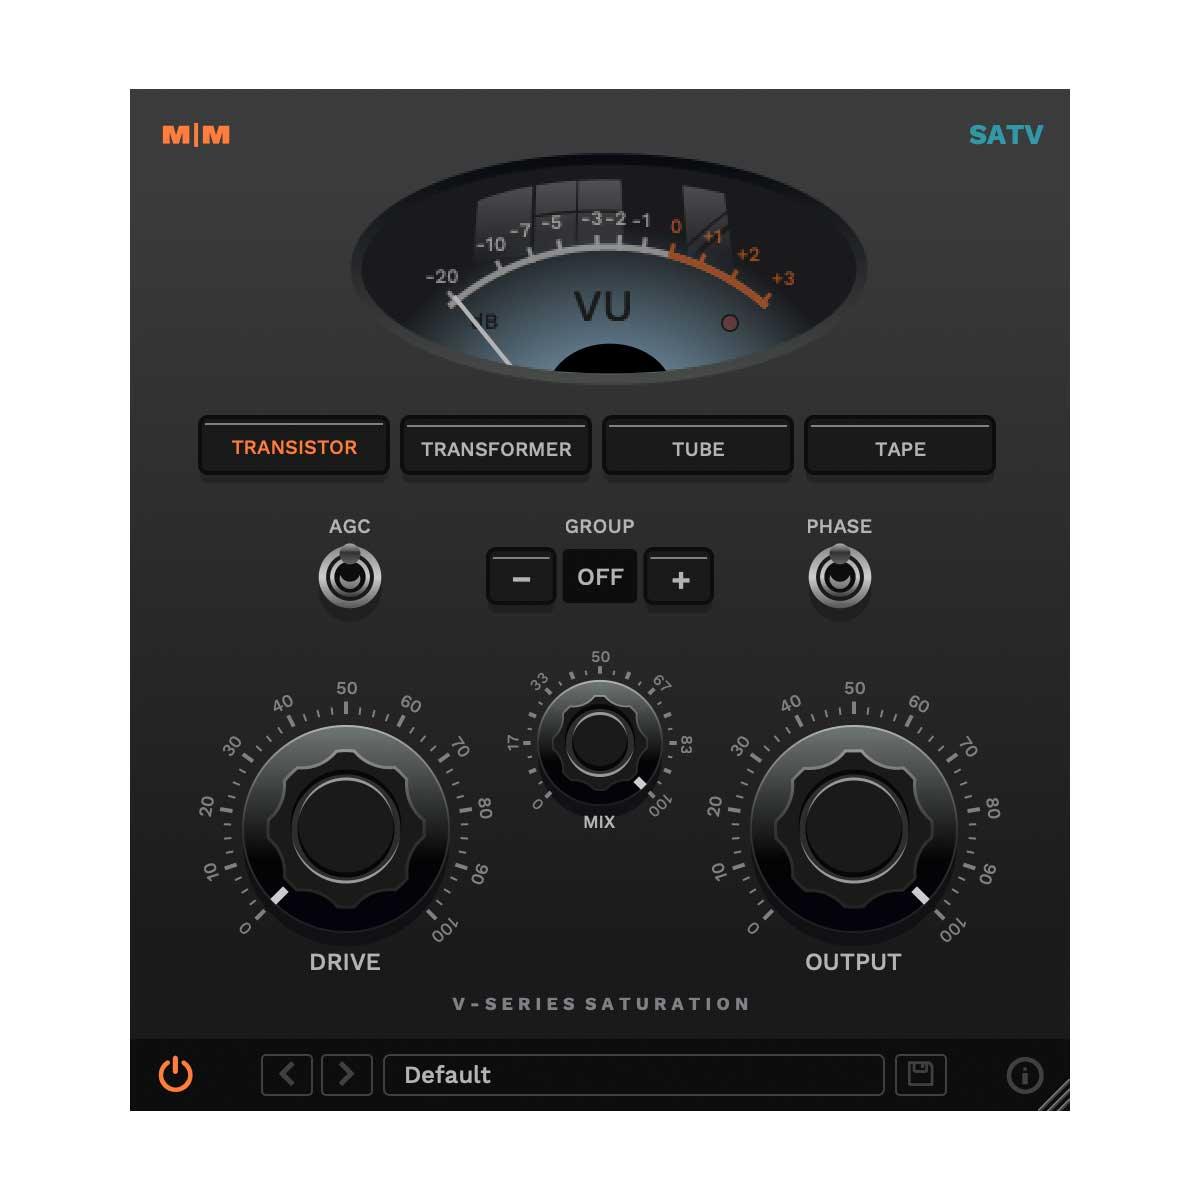 Four unique analogue modeled saturation modes Variable input drive, mix and output Control multiple instance groups Phase switch Automatic gain control 4x oversampling 64bit internal processing Formats: 64bit VST, VST3, AU and AAX Version: 4.2 SATV Manual